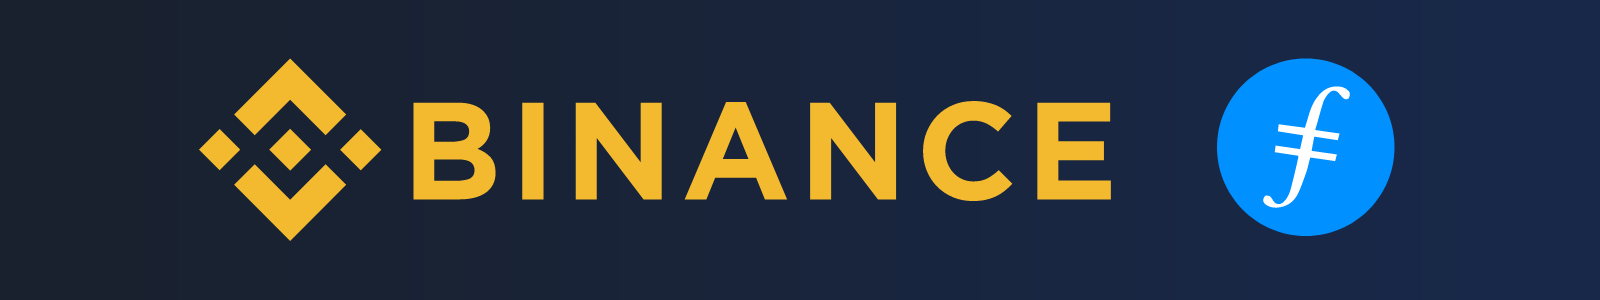 Binance Filecoin FIL Trading Competition